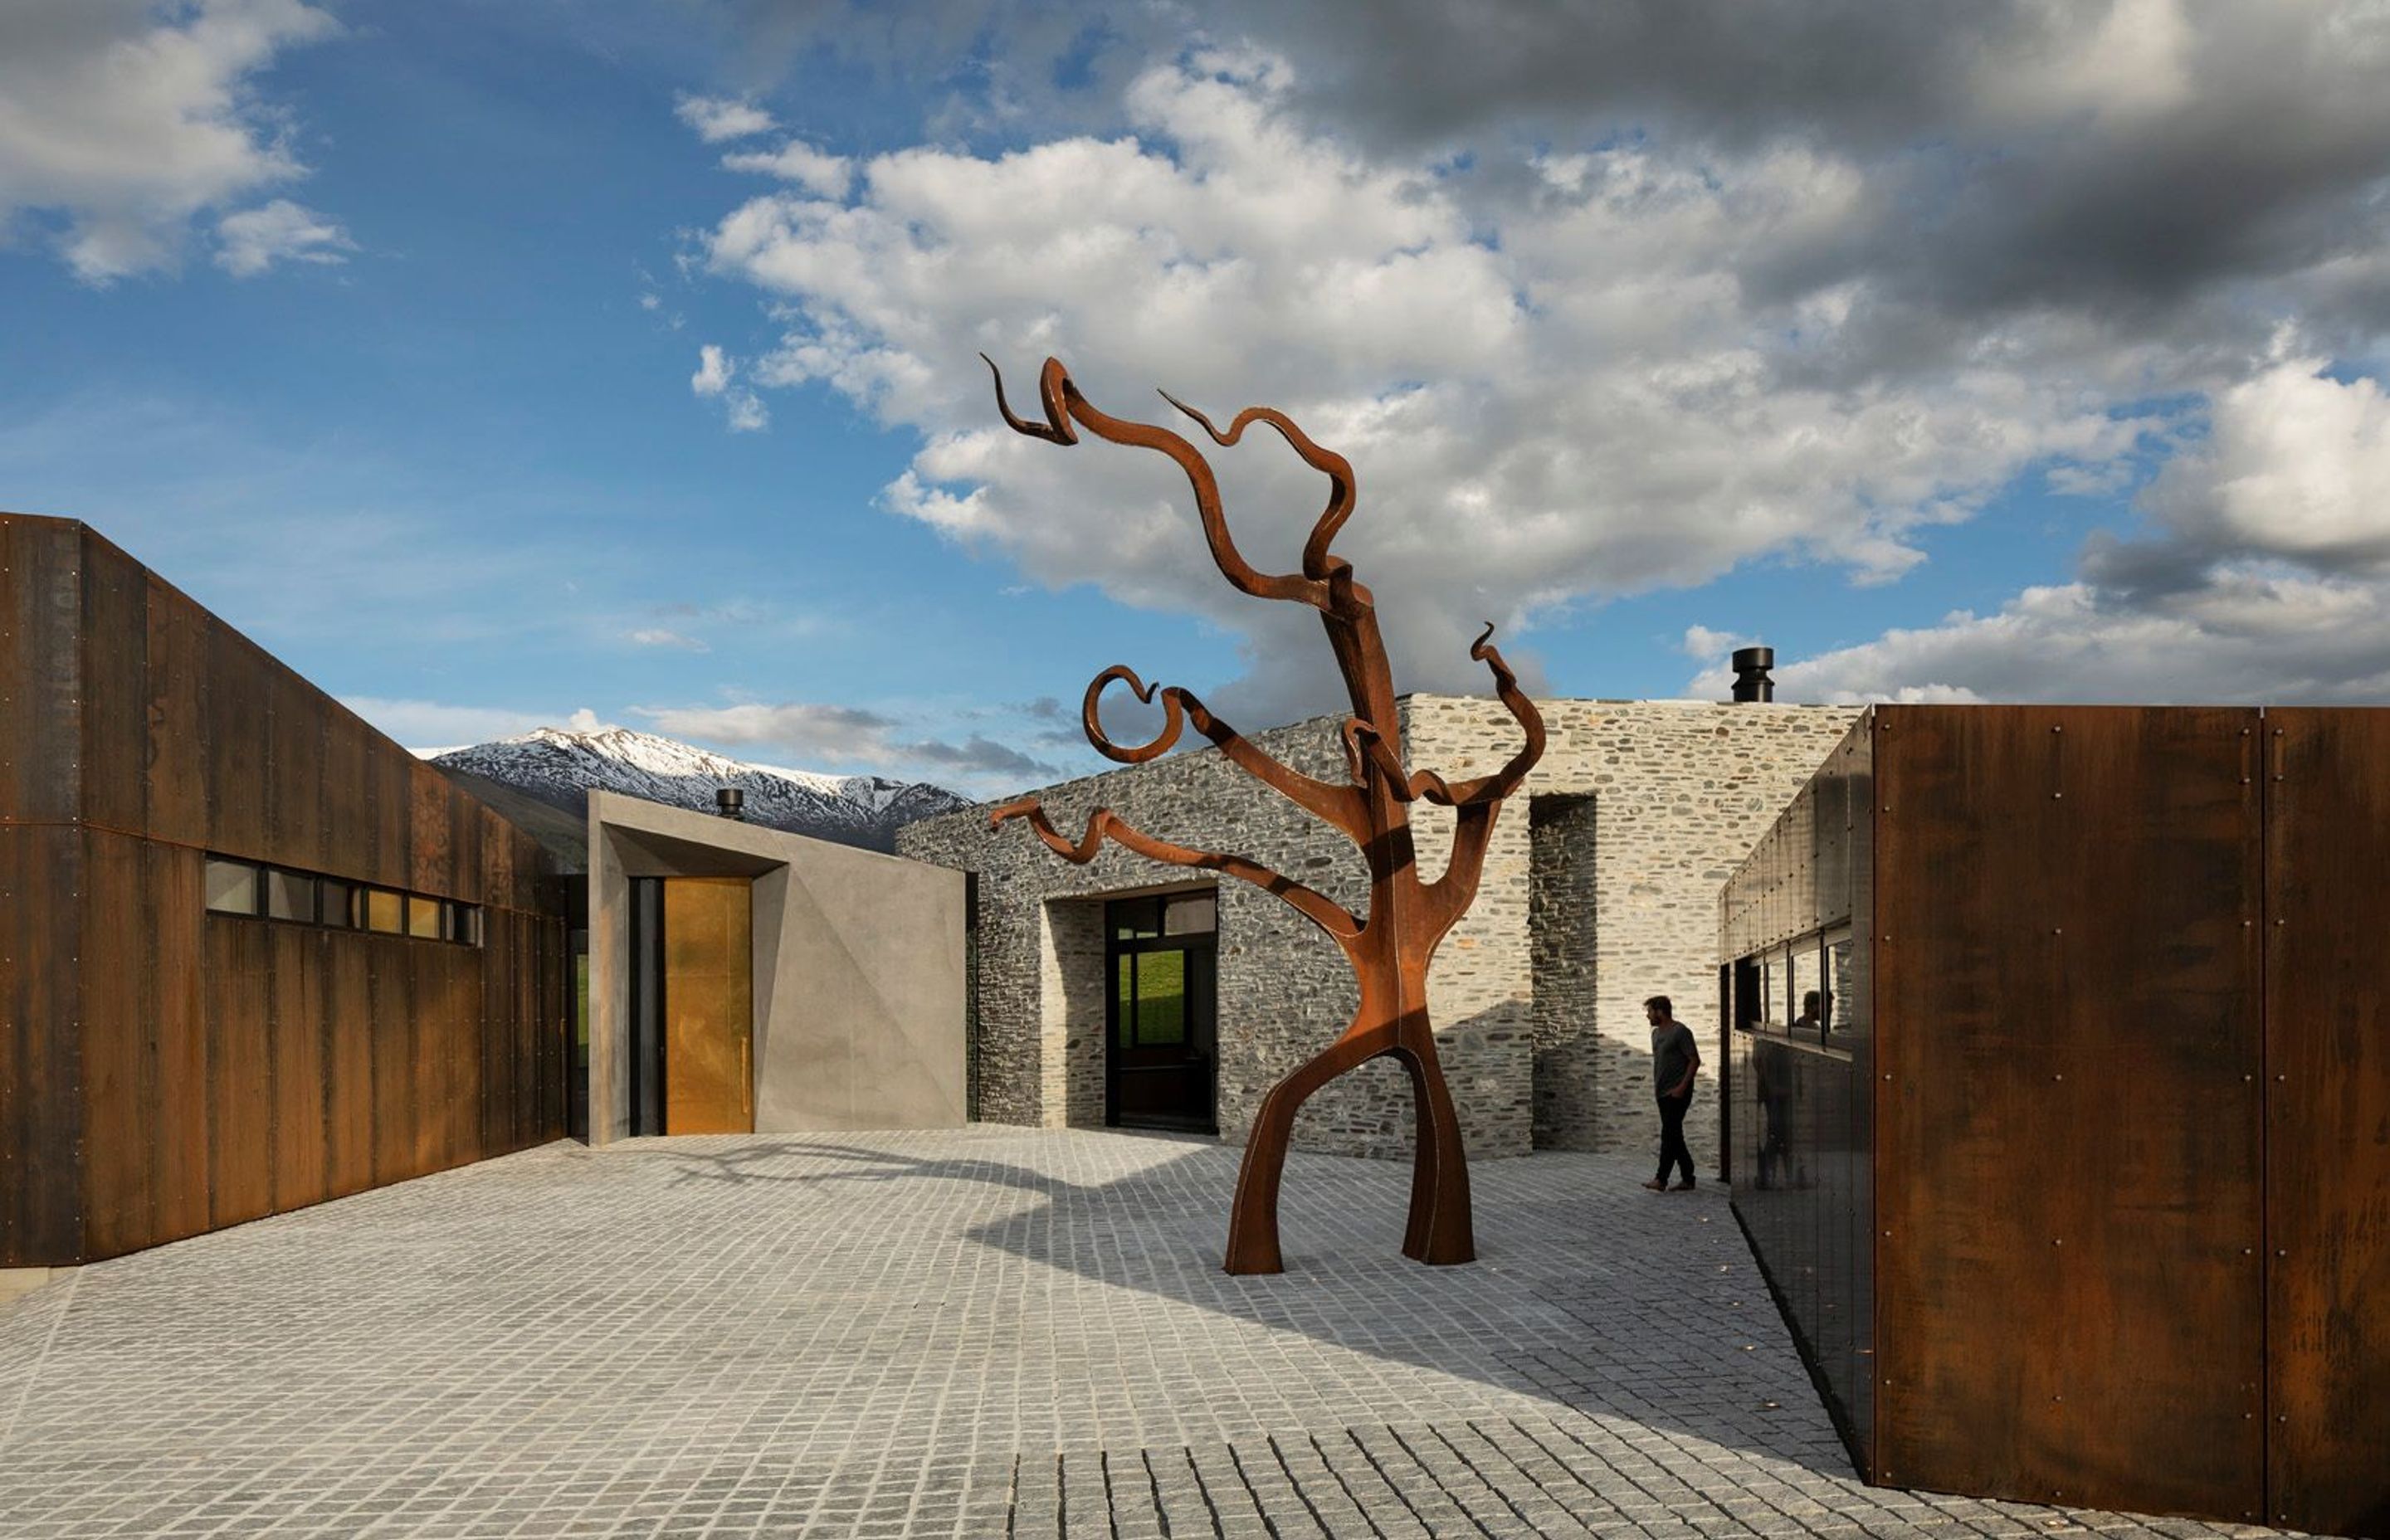 A collection of buildings in stone, steel and concrete reference the vernacular forms and materials seen throughout Central Otago – in rusty rural sheds and miners' shacks